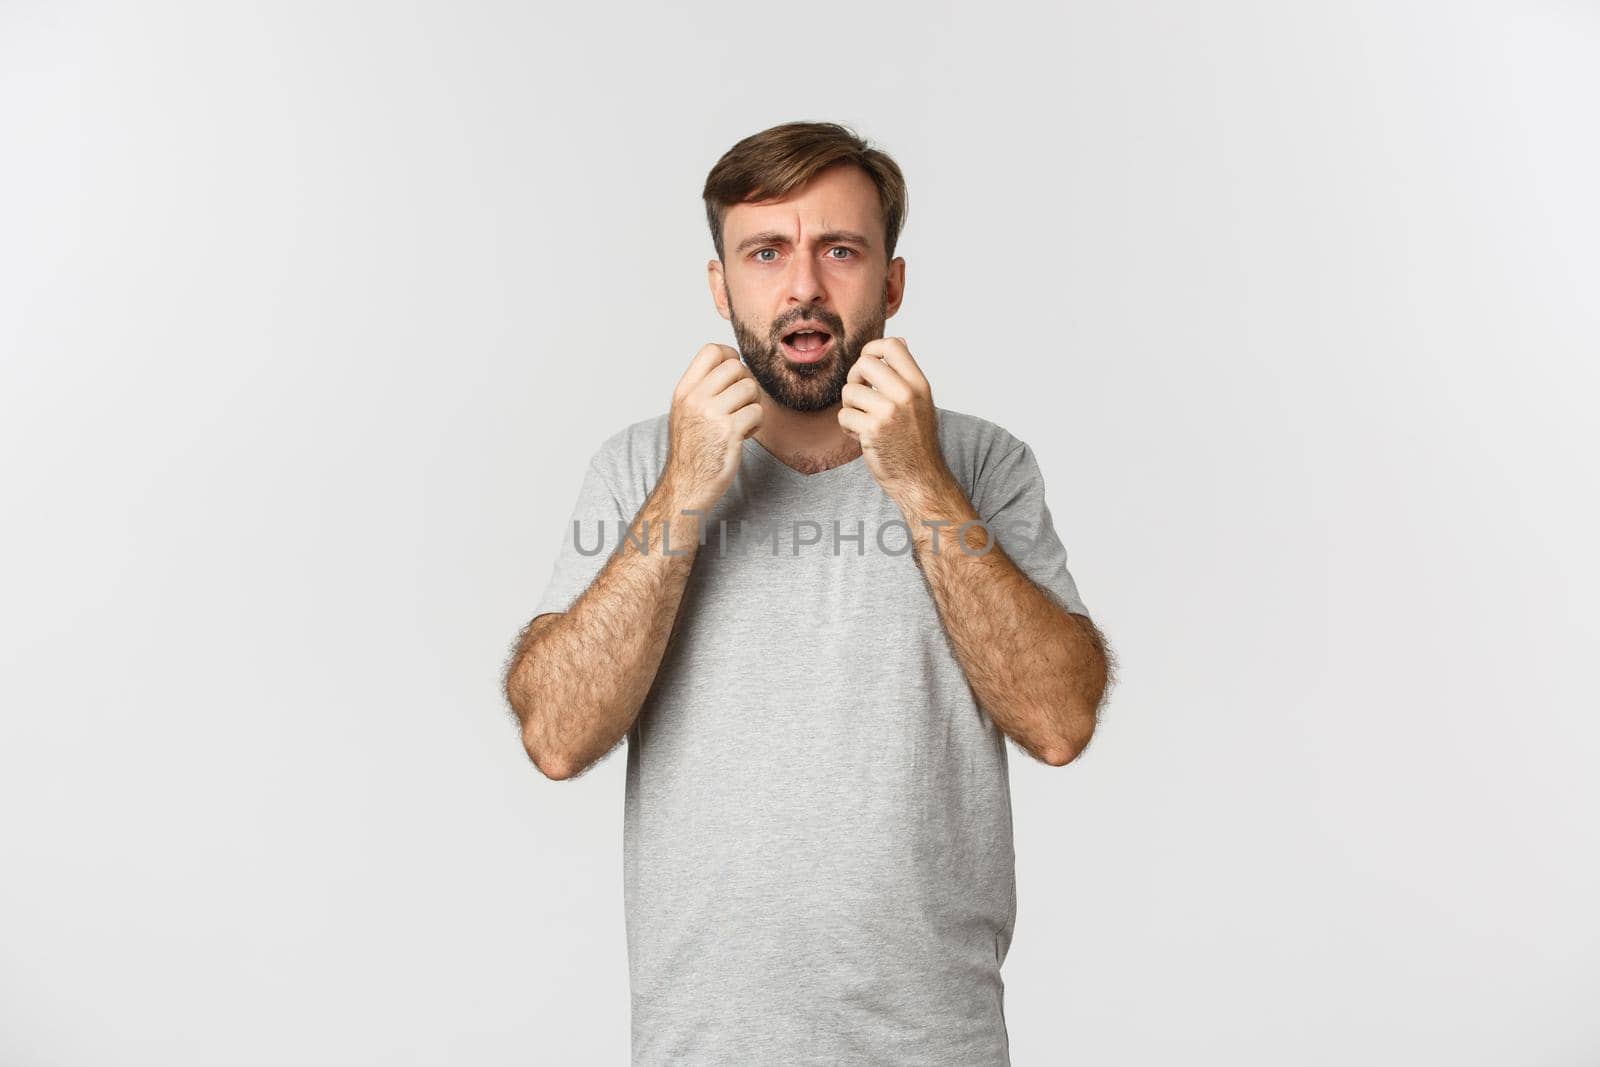 Portrait of horrified and shocked man grimacing, standing anxious over white background.